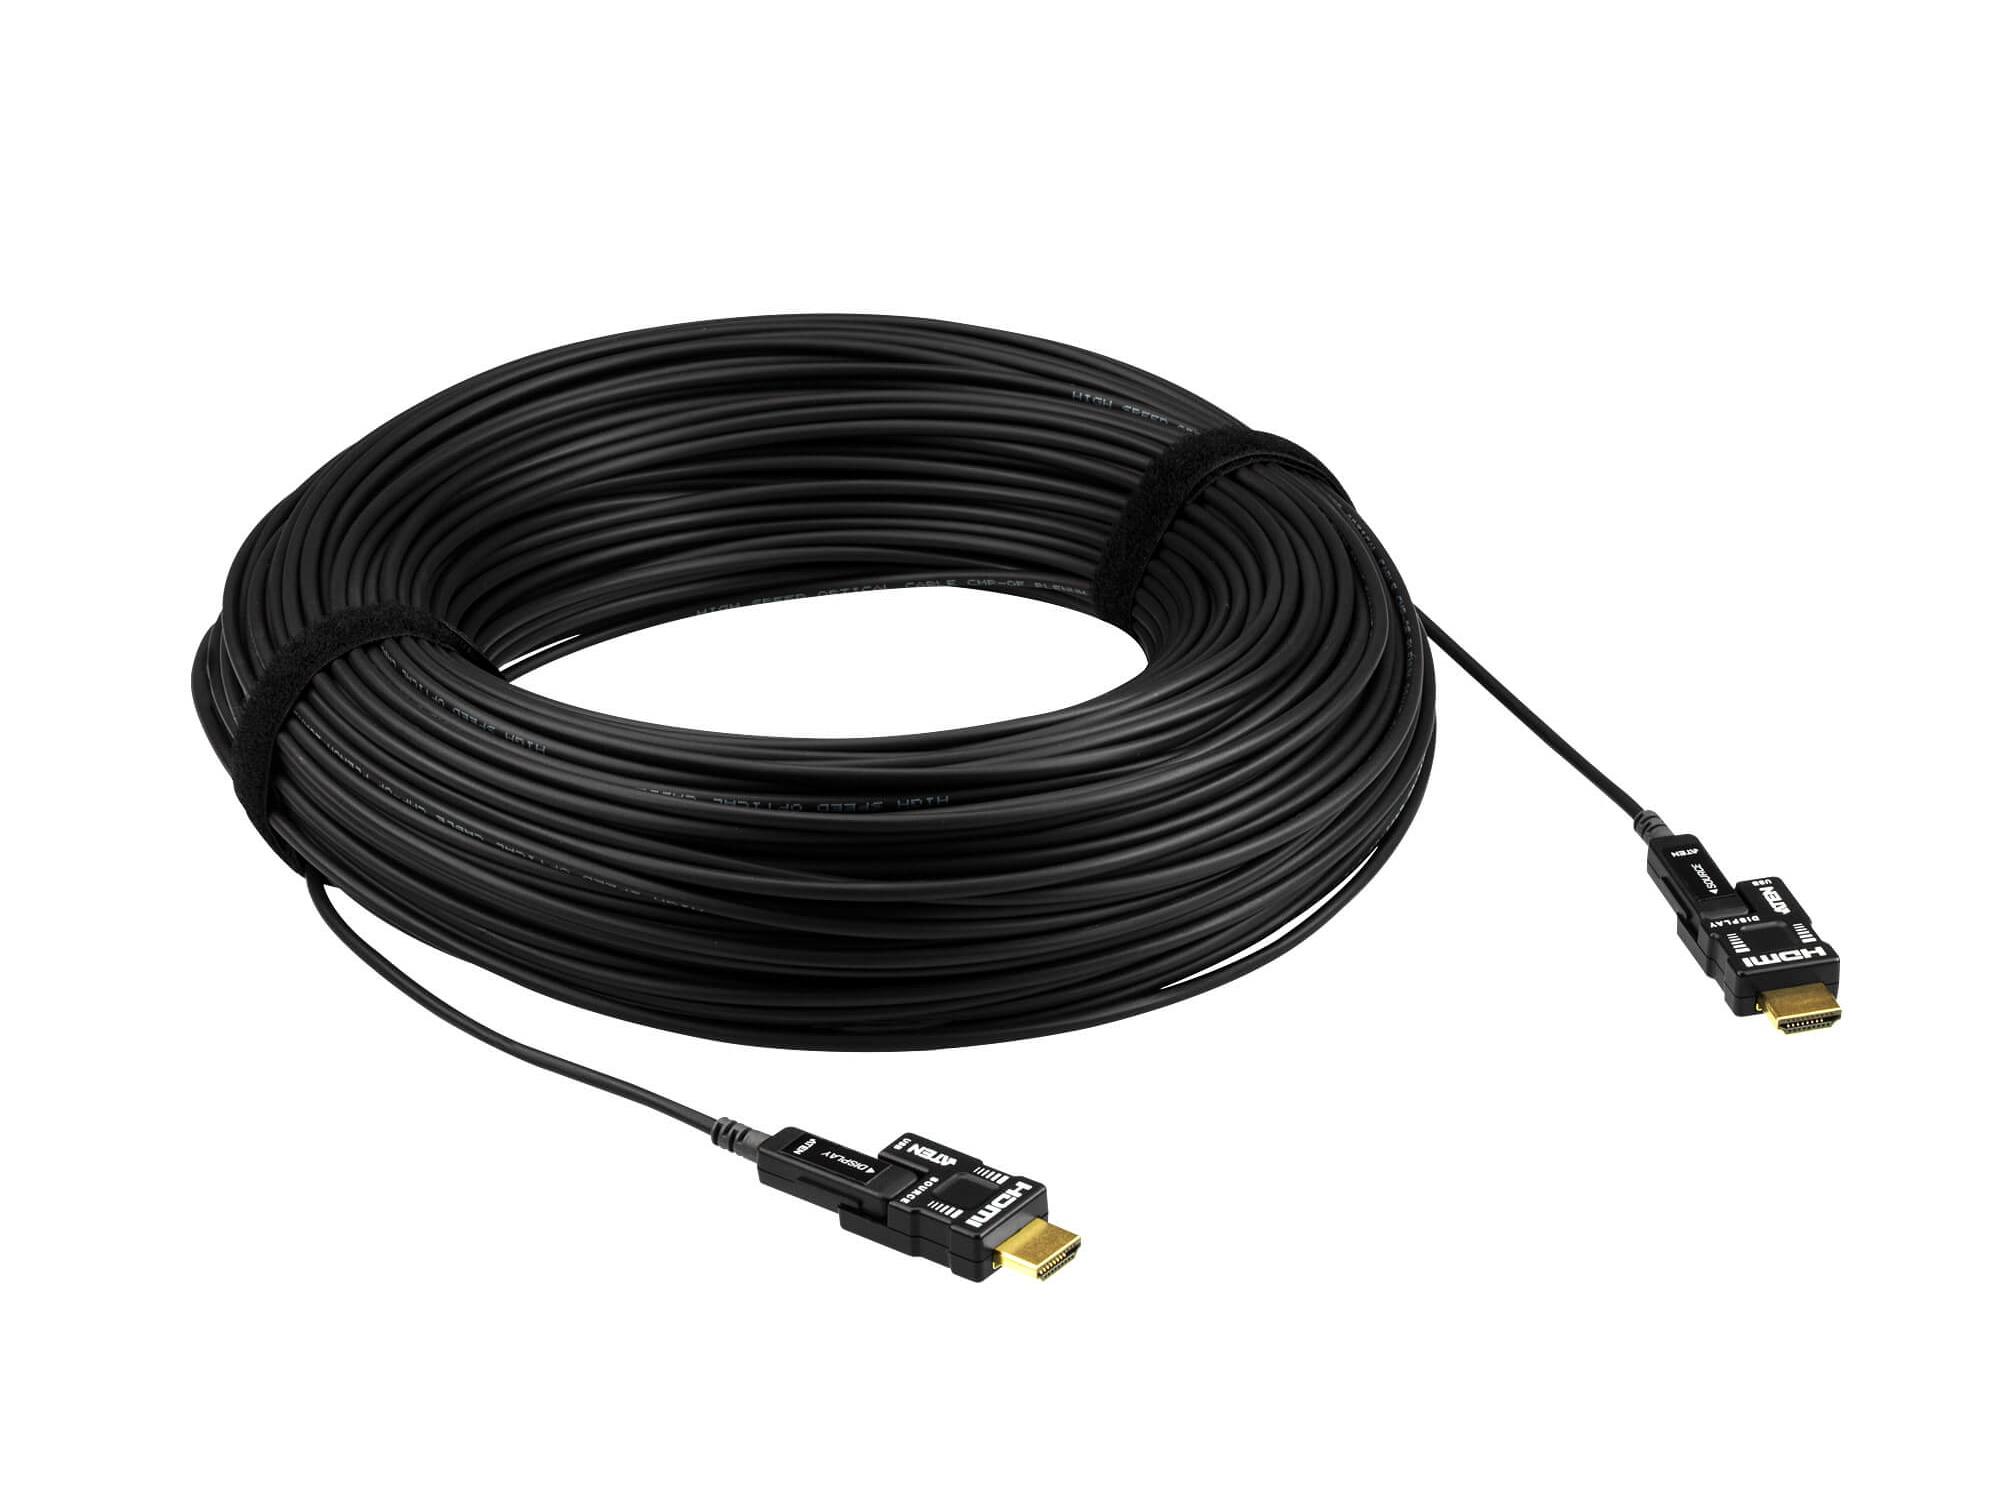 VE7835 100m True 4K HDMI 2.0 Active Optical Cable by Aten